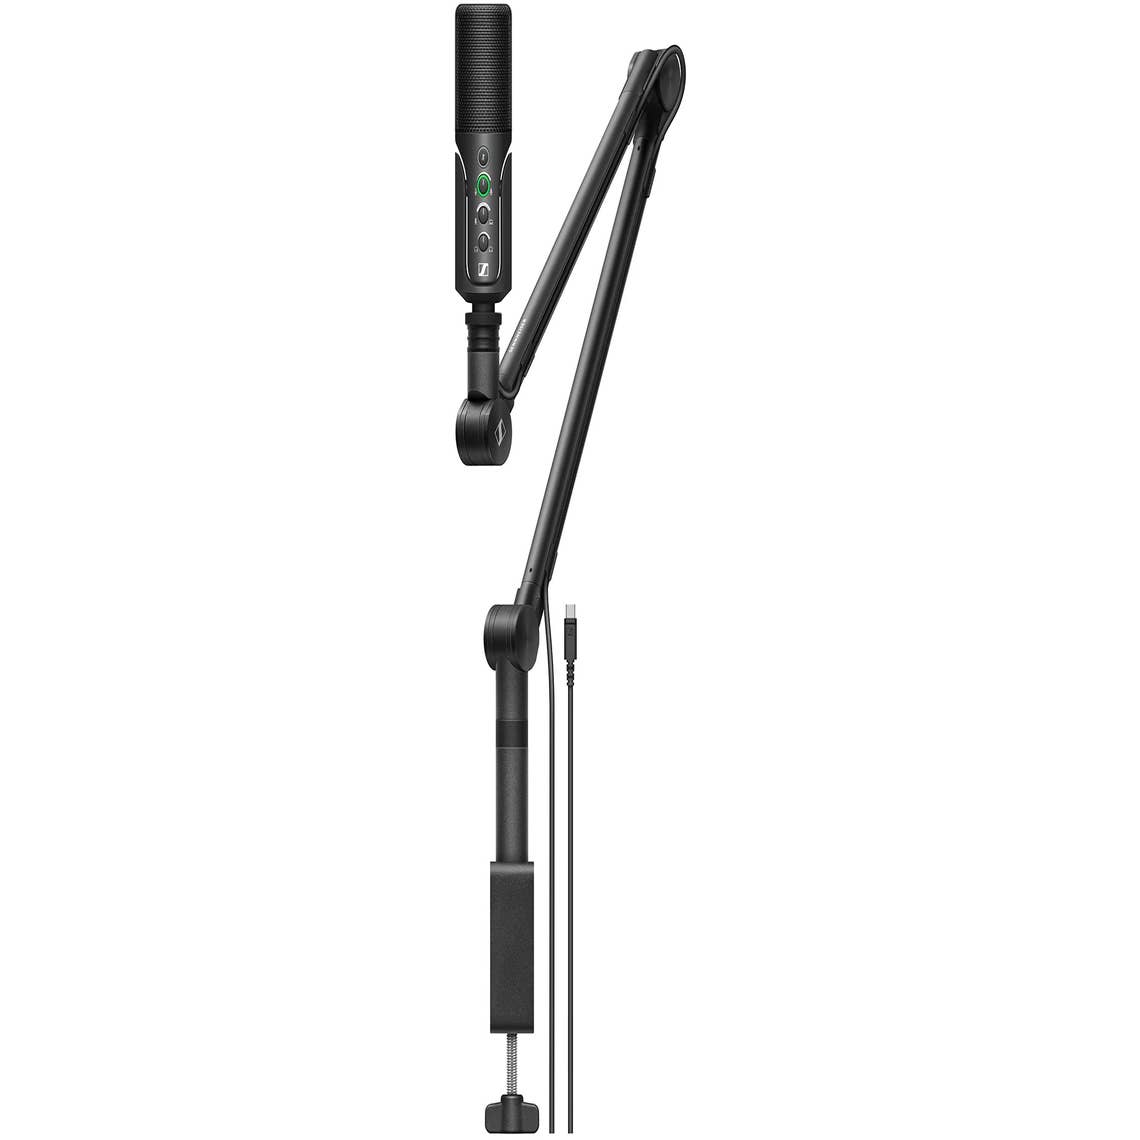 Microphone boom arm, Top quality from top brands